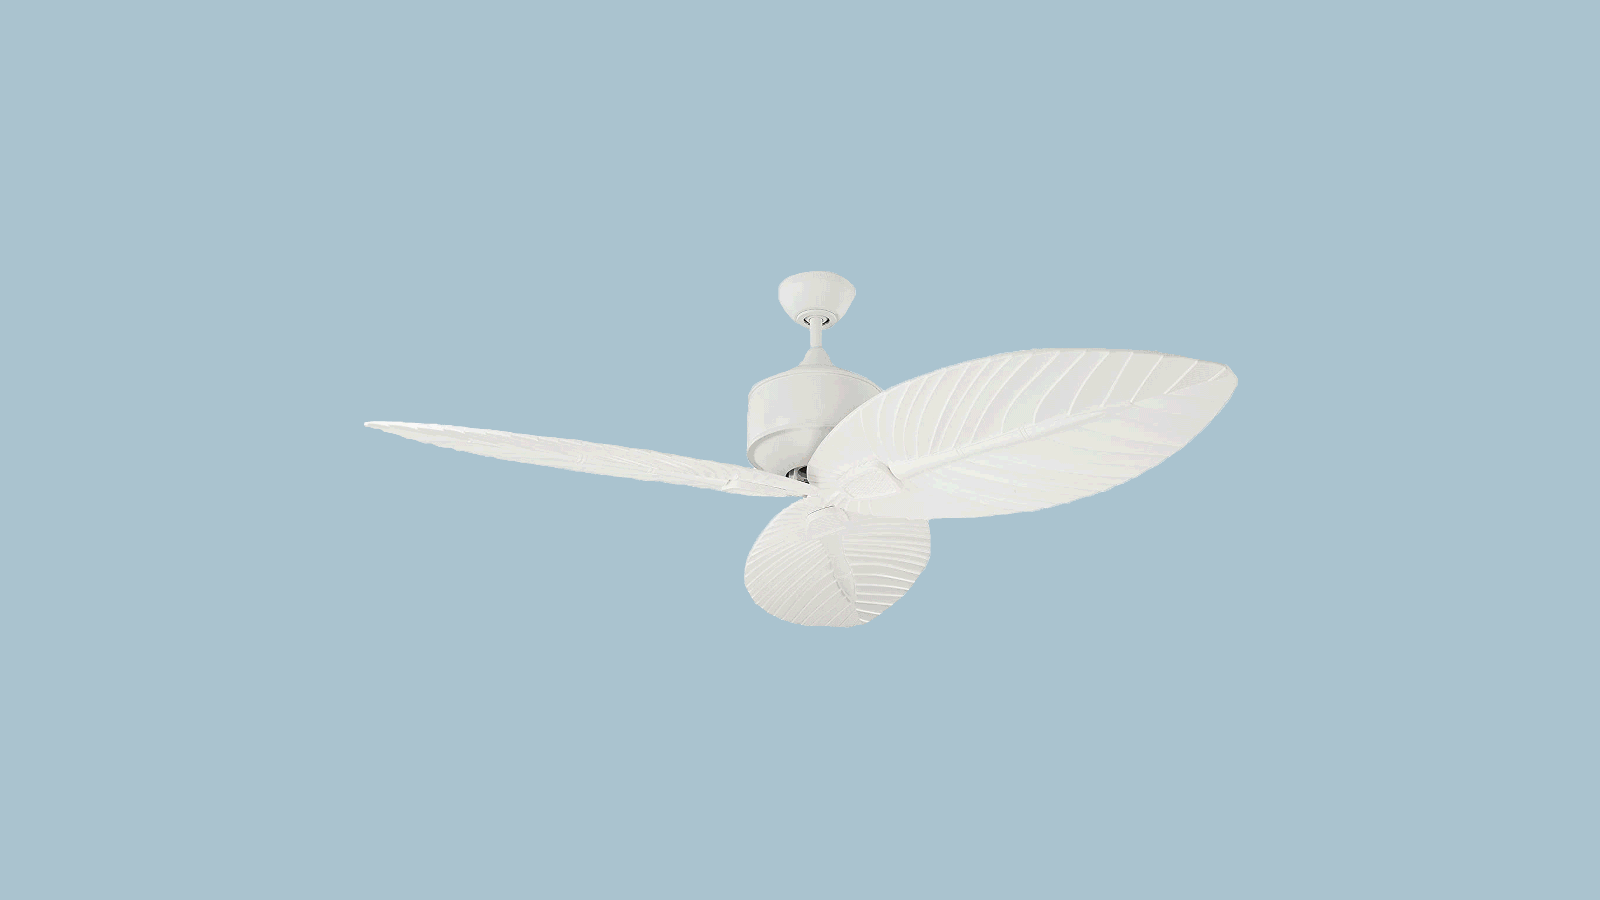 14 Ceiling Fans That Deliver on Style